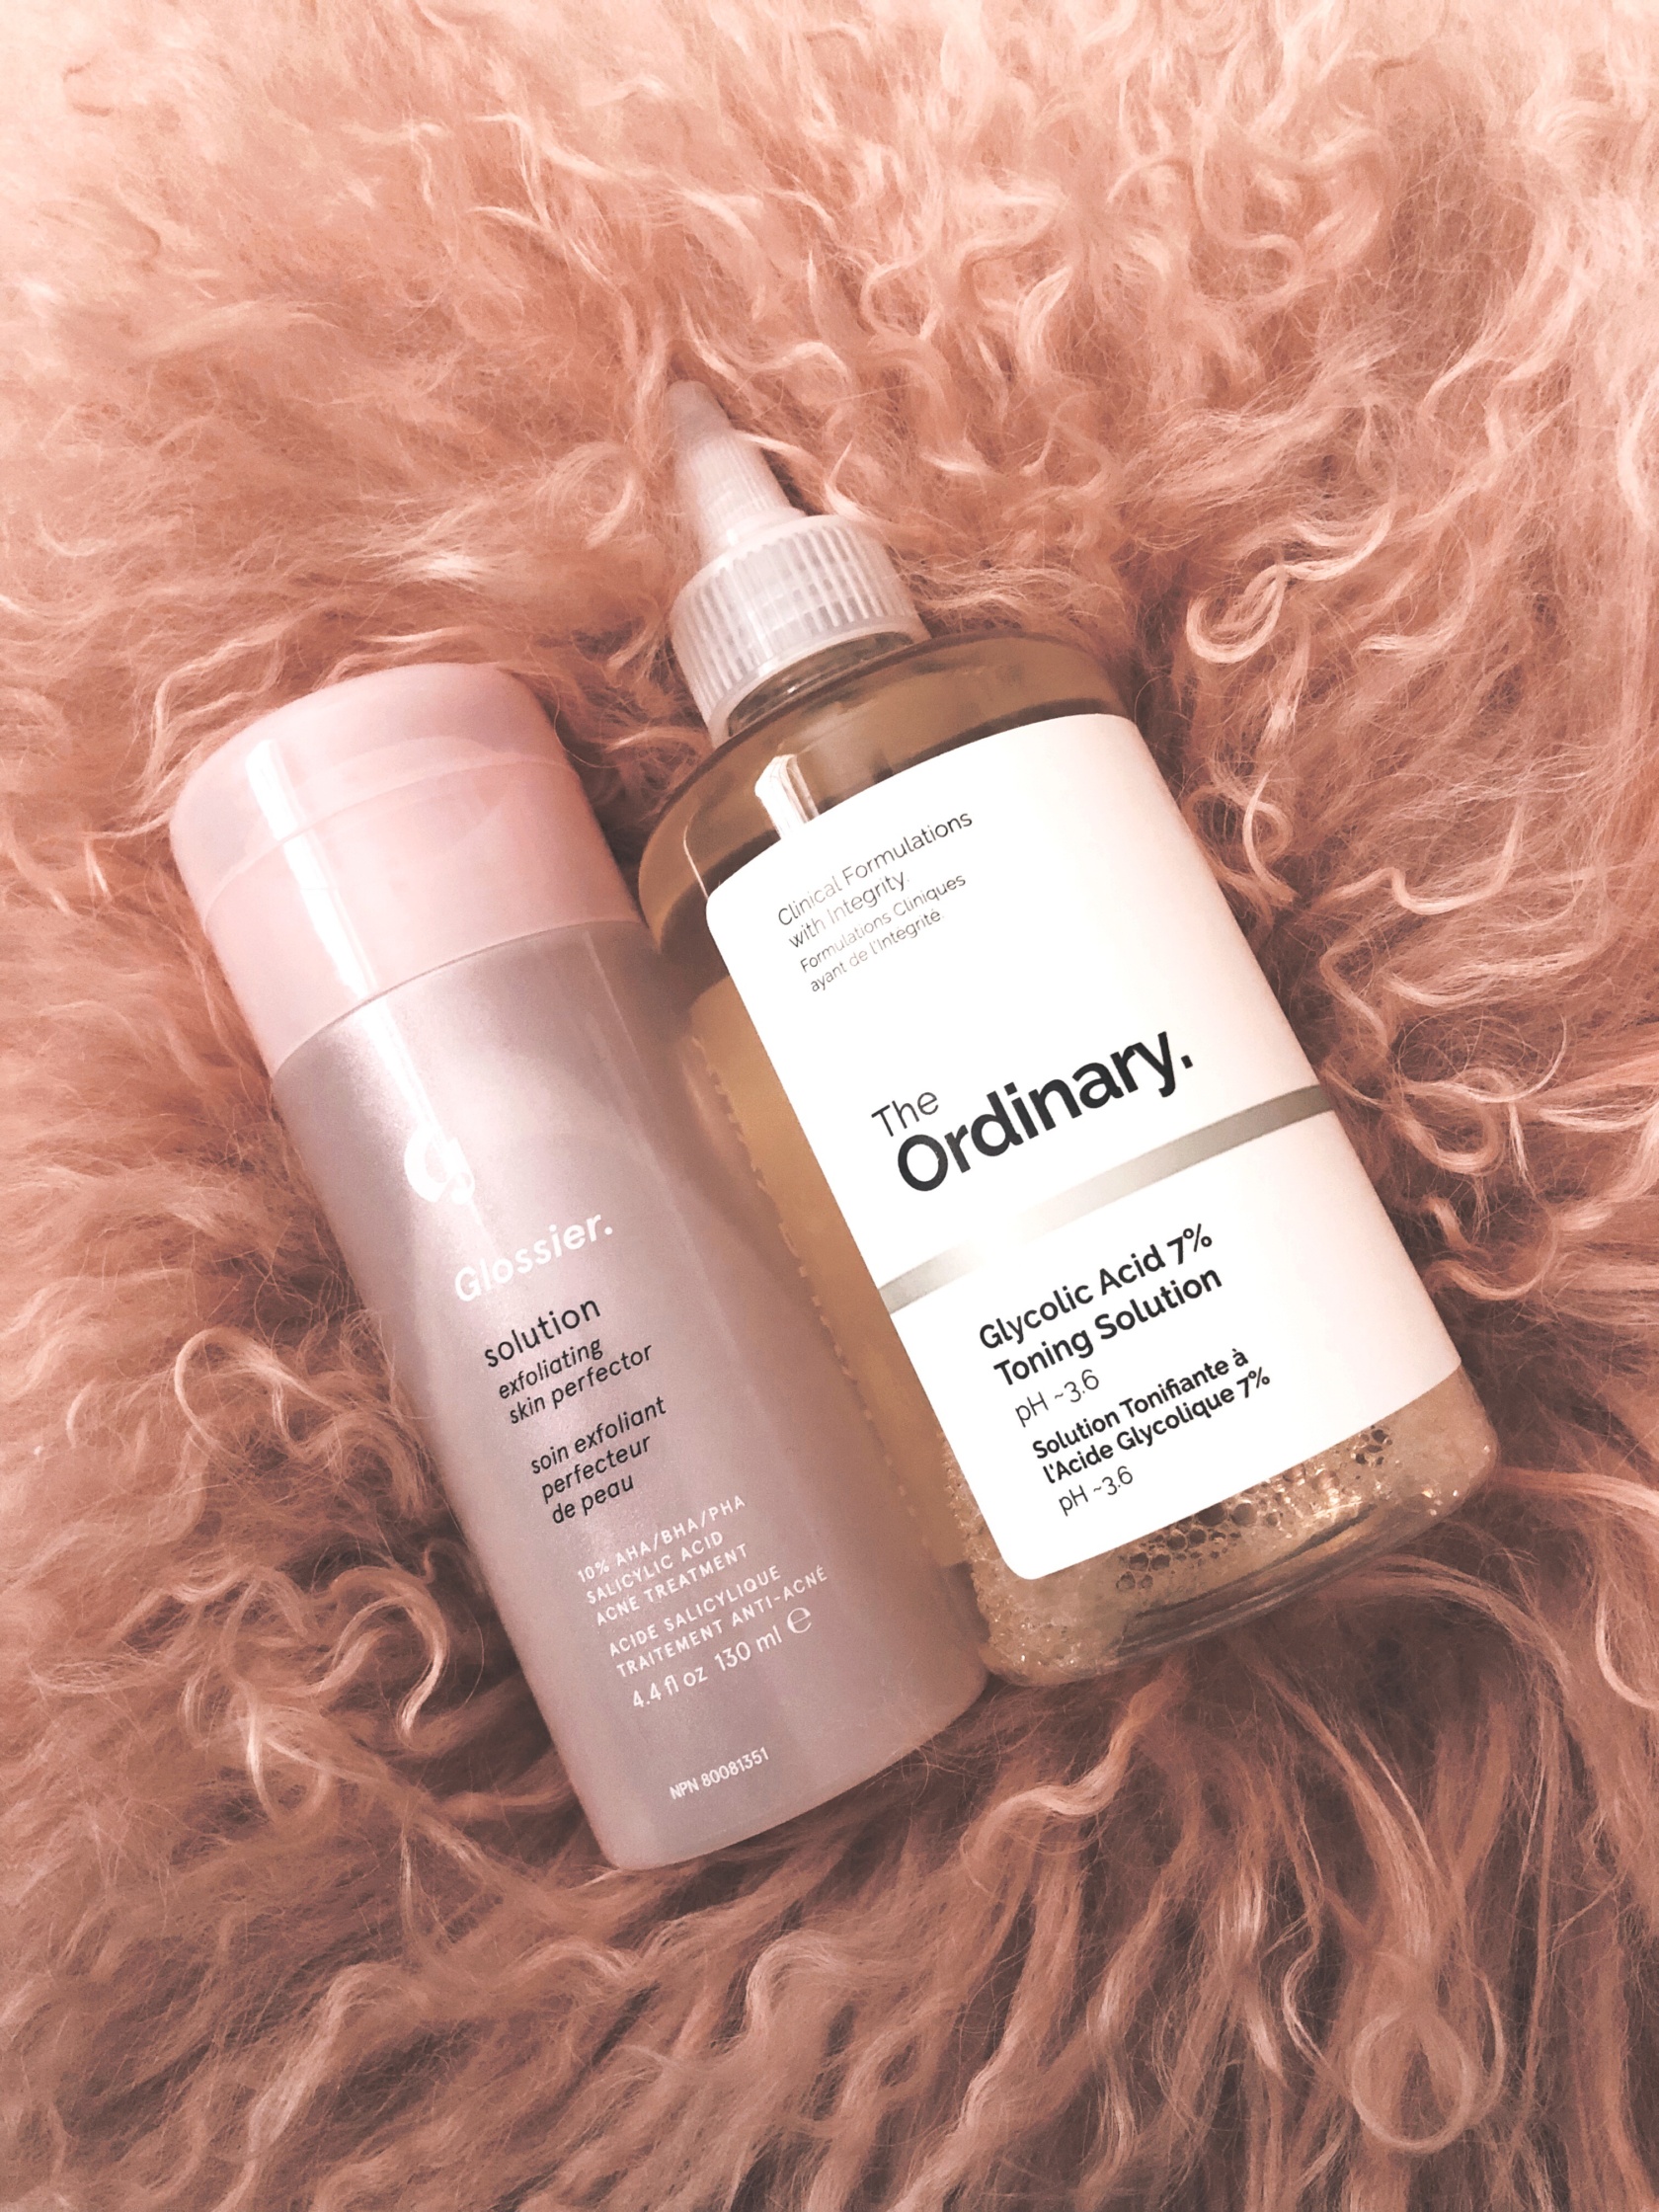 The Ordinary, Acide Glycolique - Blonde and Peonies